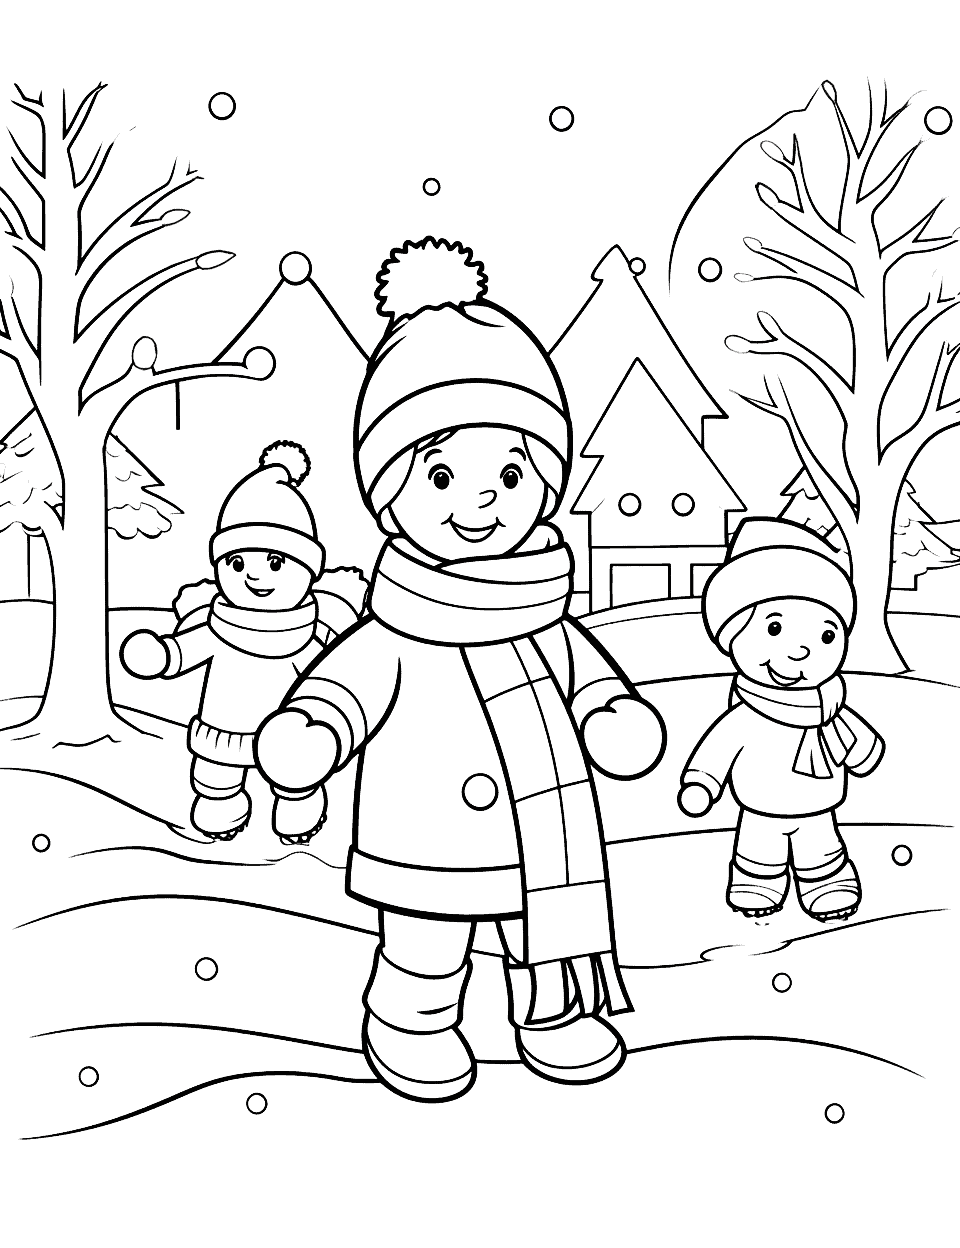 Crayola Winter Fun Coloring Page - A winter scene filled with kids playing in the snow, ready to be brought to life with color.